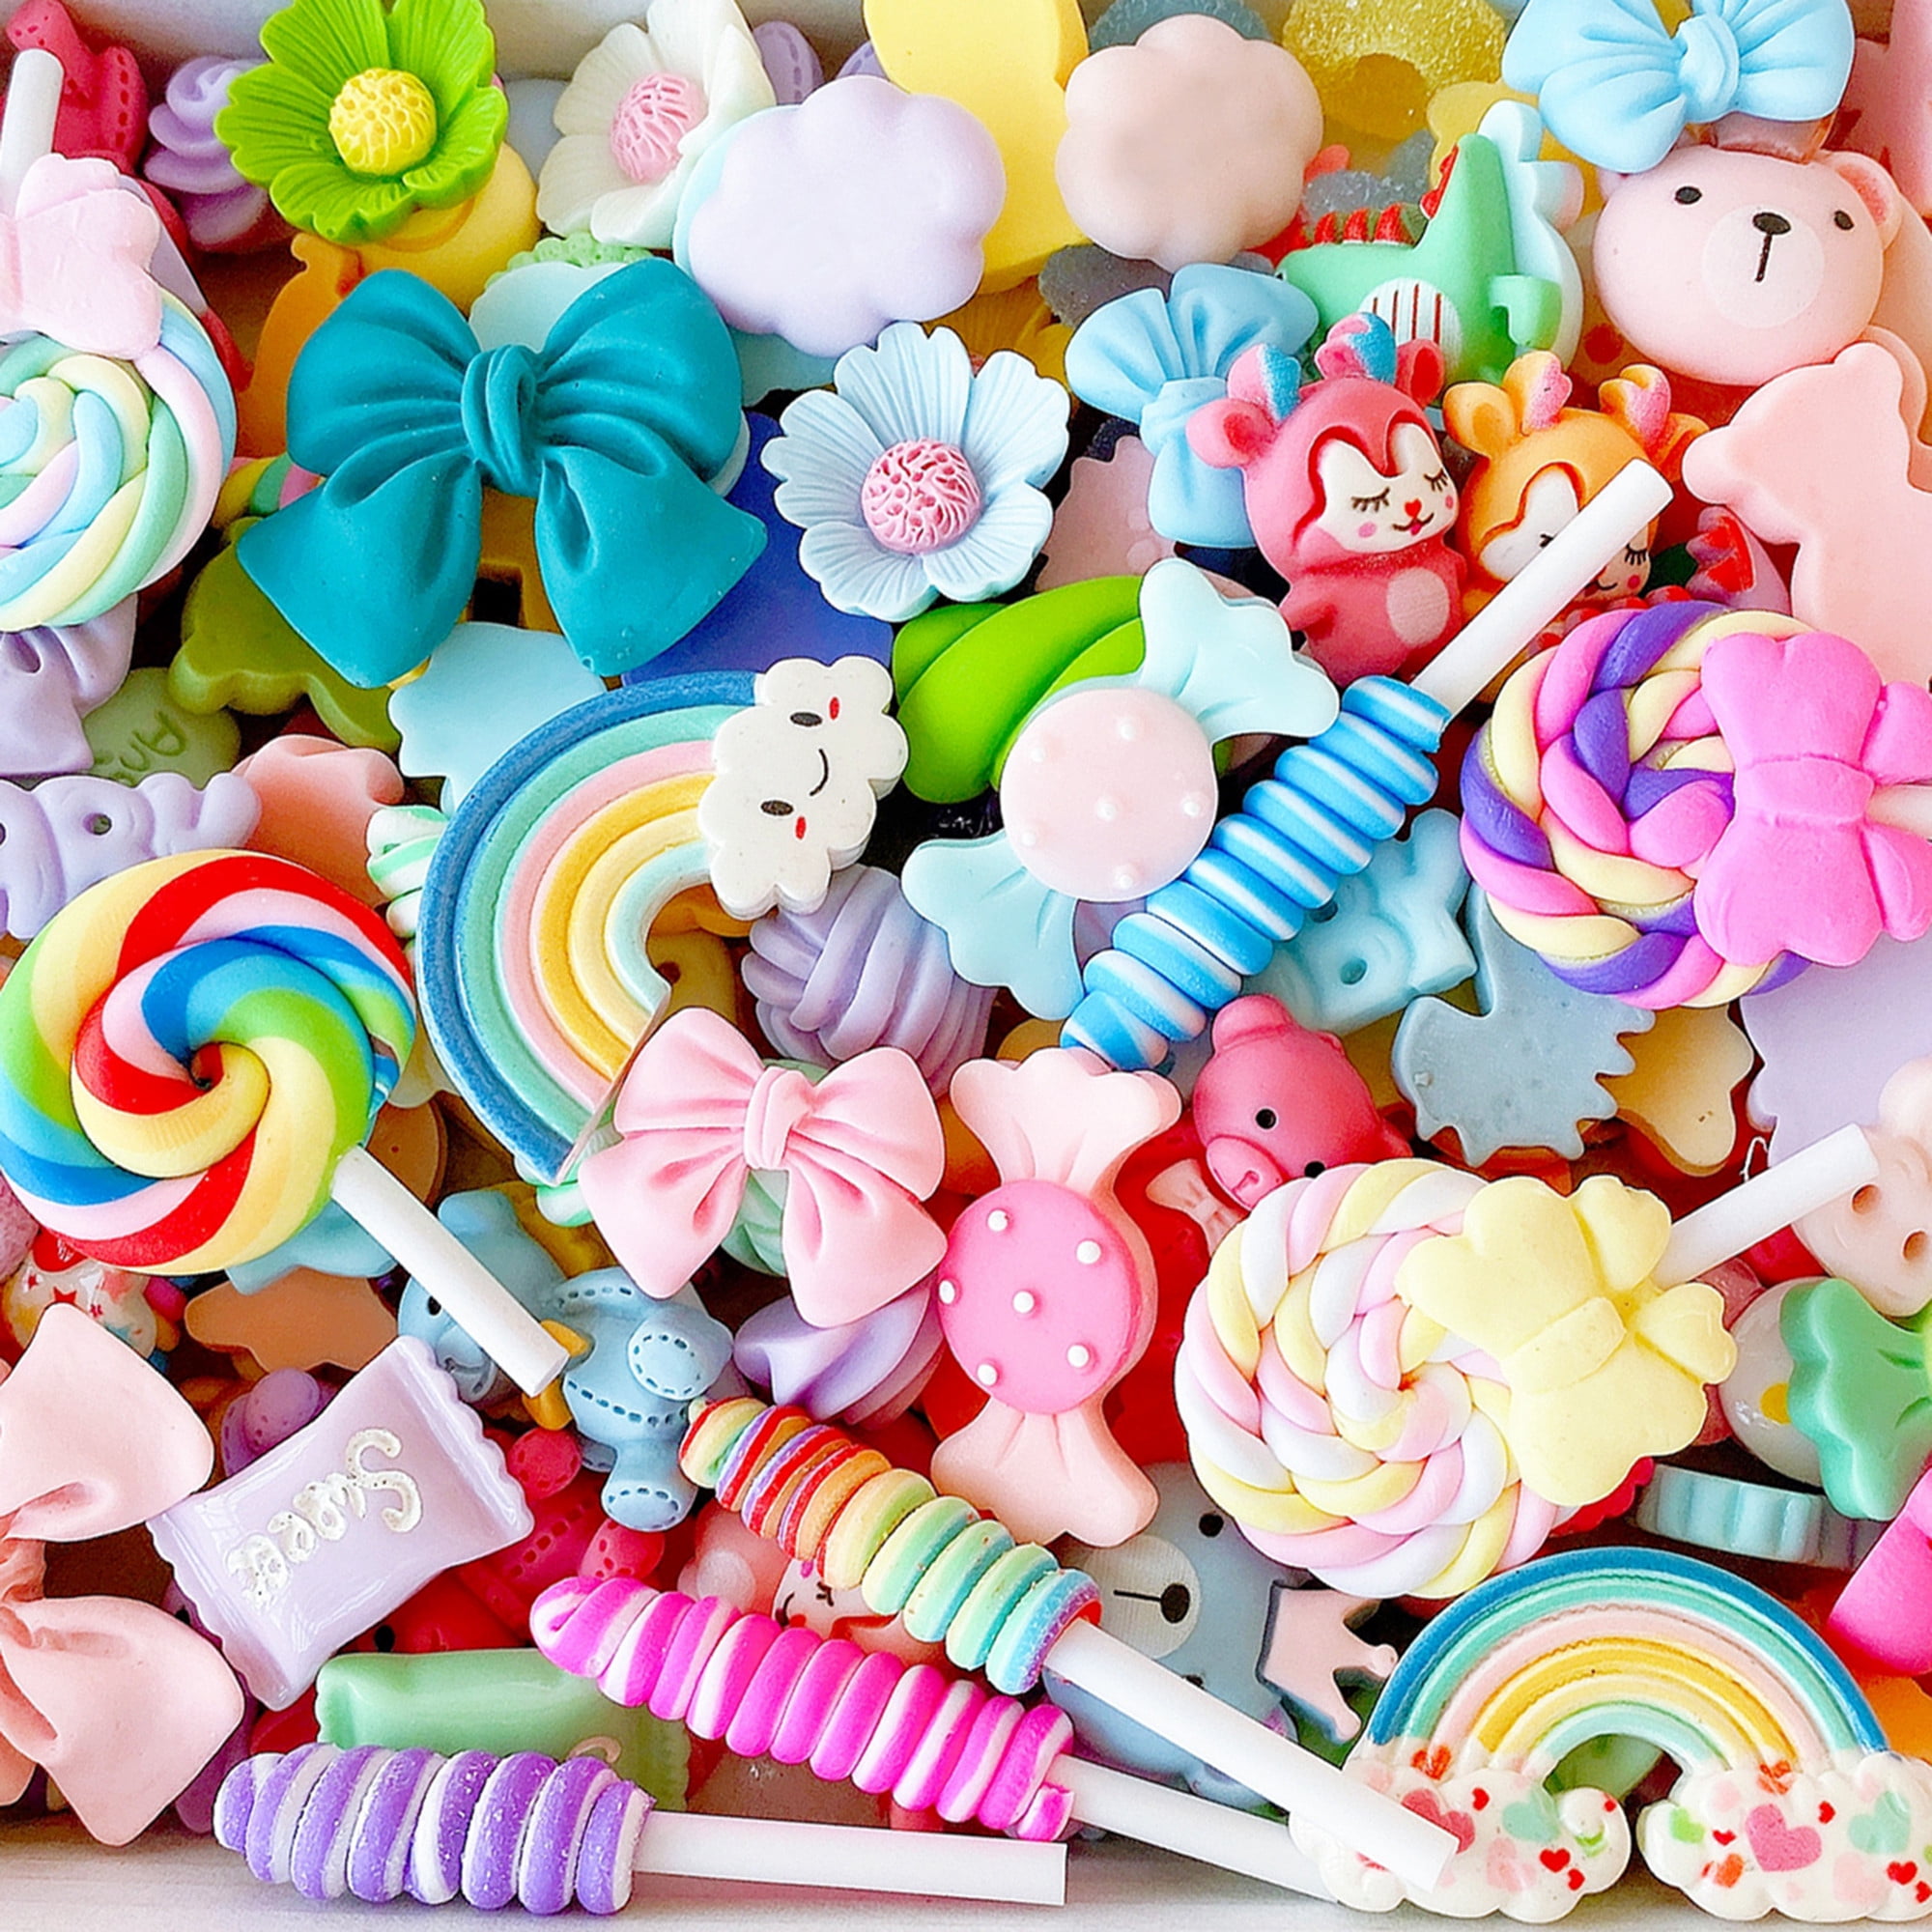 200 Pcs Charms Cute Set, Bulk Mixed Resin Charms Set Supplies for DIY Craft  Making Ornament Scrapbooking (Colorful)